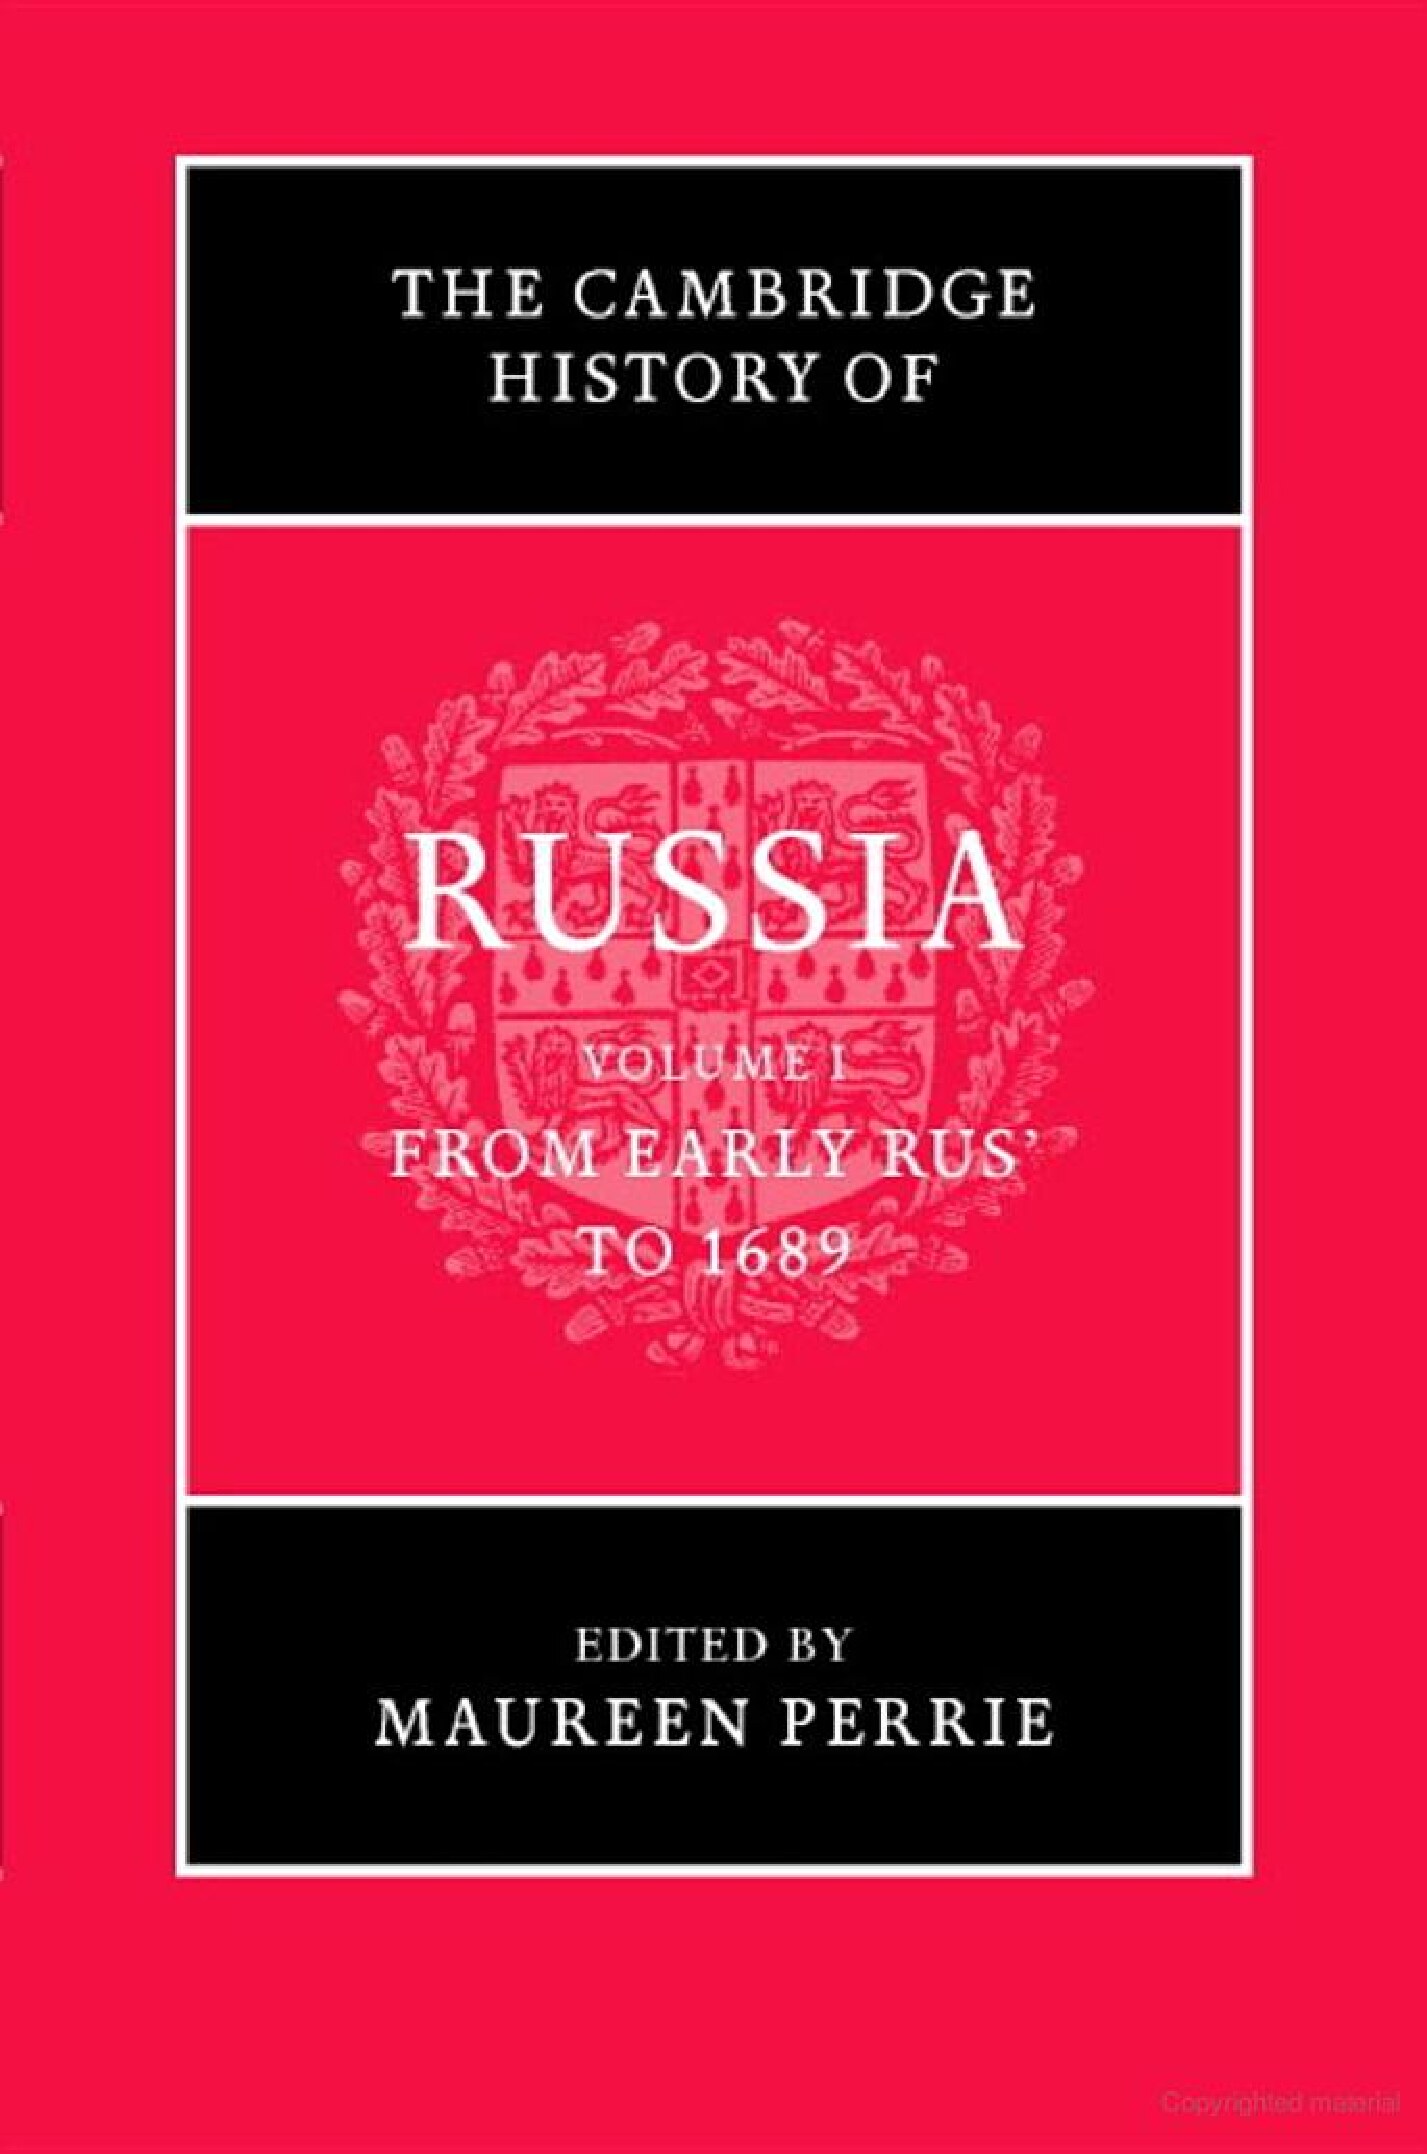 THE CAMBRIDGE HISTORY OF RUSSIA, Volume I - From Early Rus’ to 1689